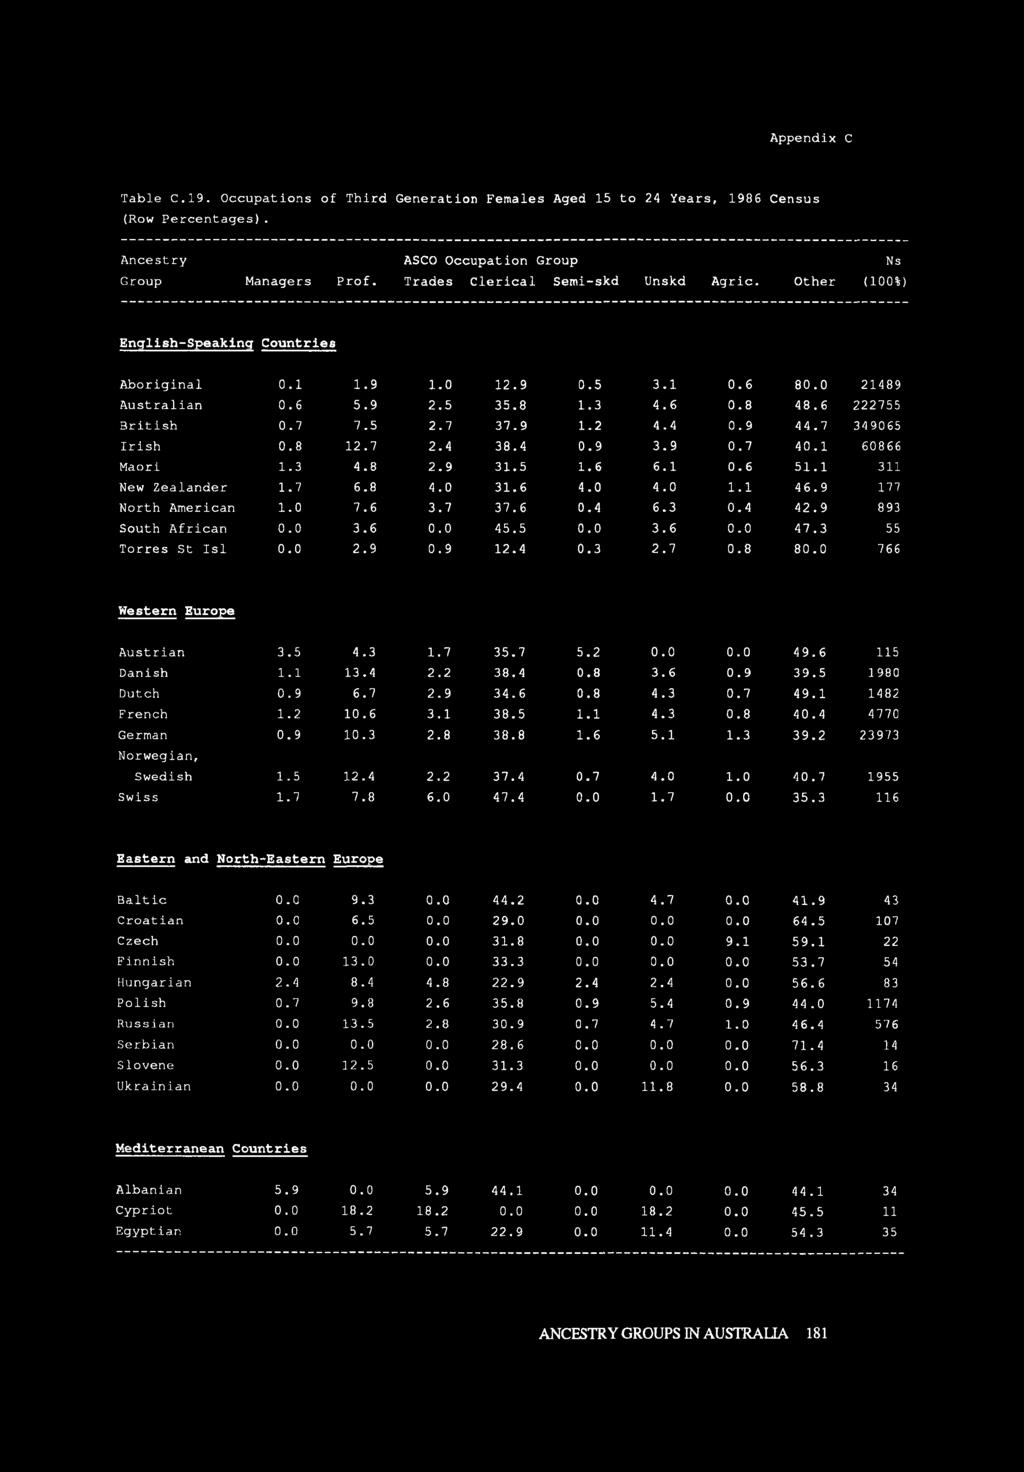 Appendix C Table C.19. Occupations of Third Generation Females Aged 15 to 24 Years, 1986 Census (Row Percentages). Group Managers Prof. ASCO Occupation Group Trades Clerical Semi-skd Unskd Agric.